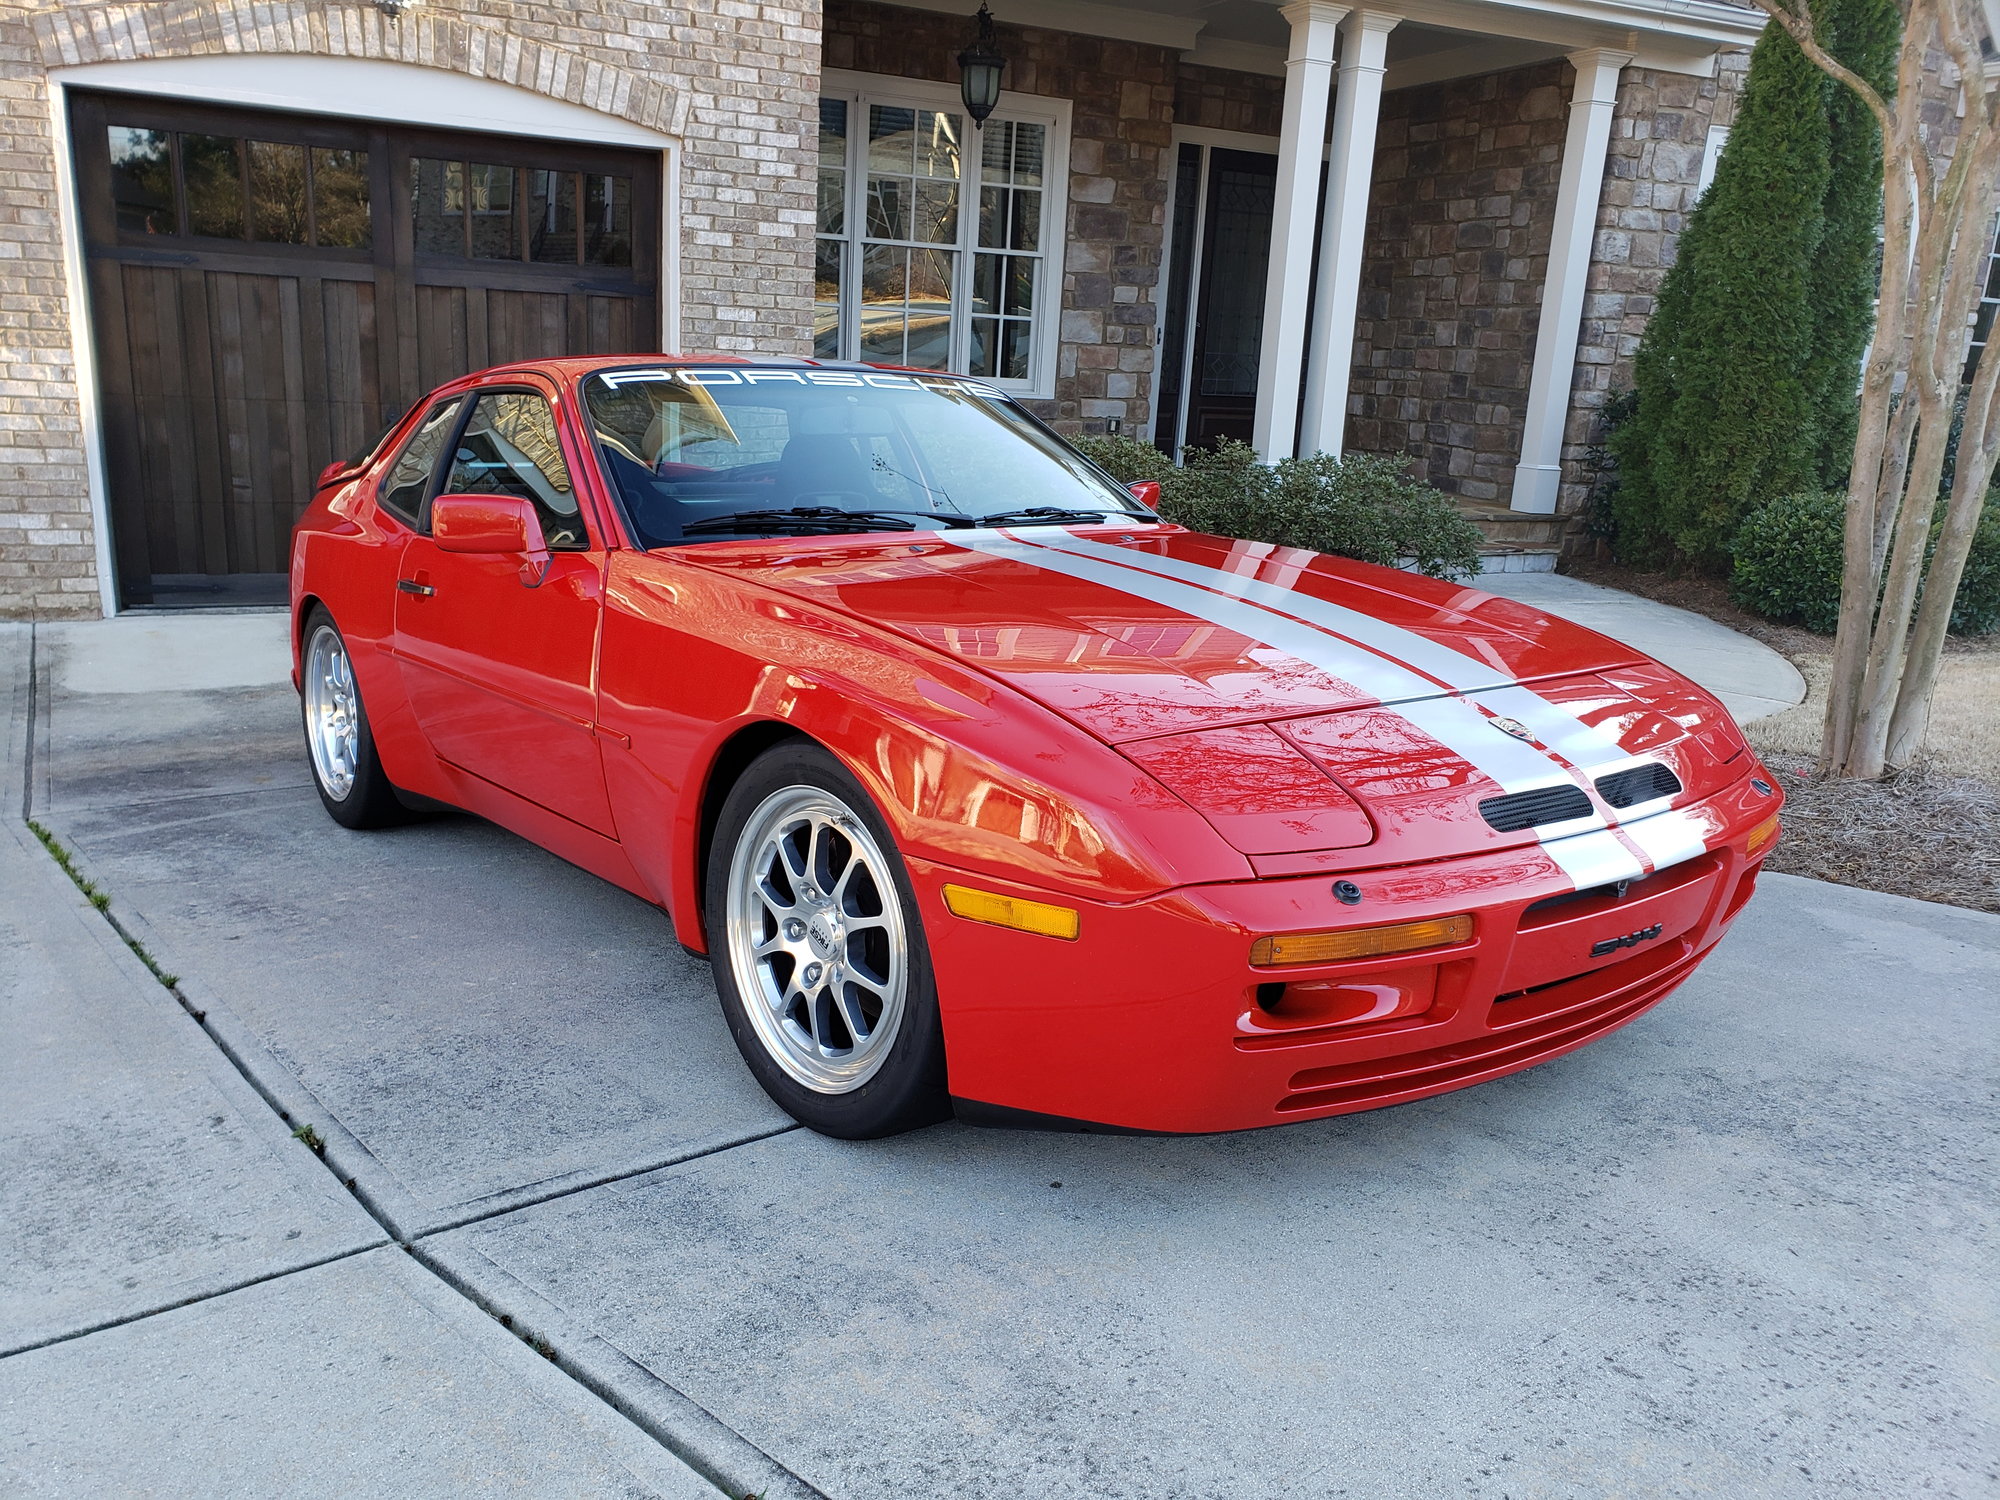 1986 Porsche 944 -  - Used - VIN WP0AA095XGN150162 - 138,000 Miles - 4 cyl - 2WD - Manual - Coupe - Red - Marietta, GA 30062, United States